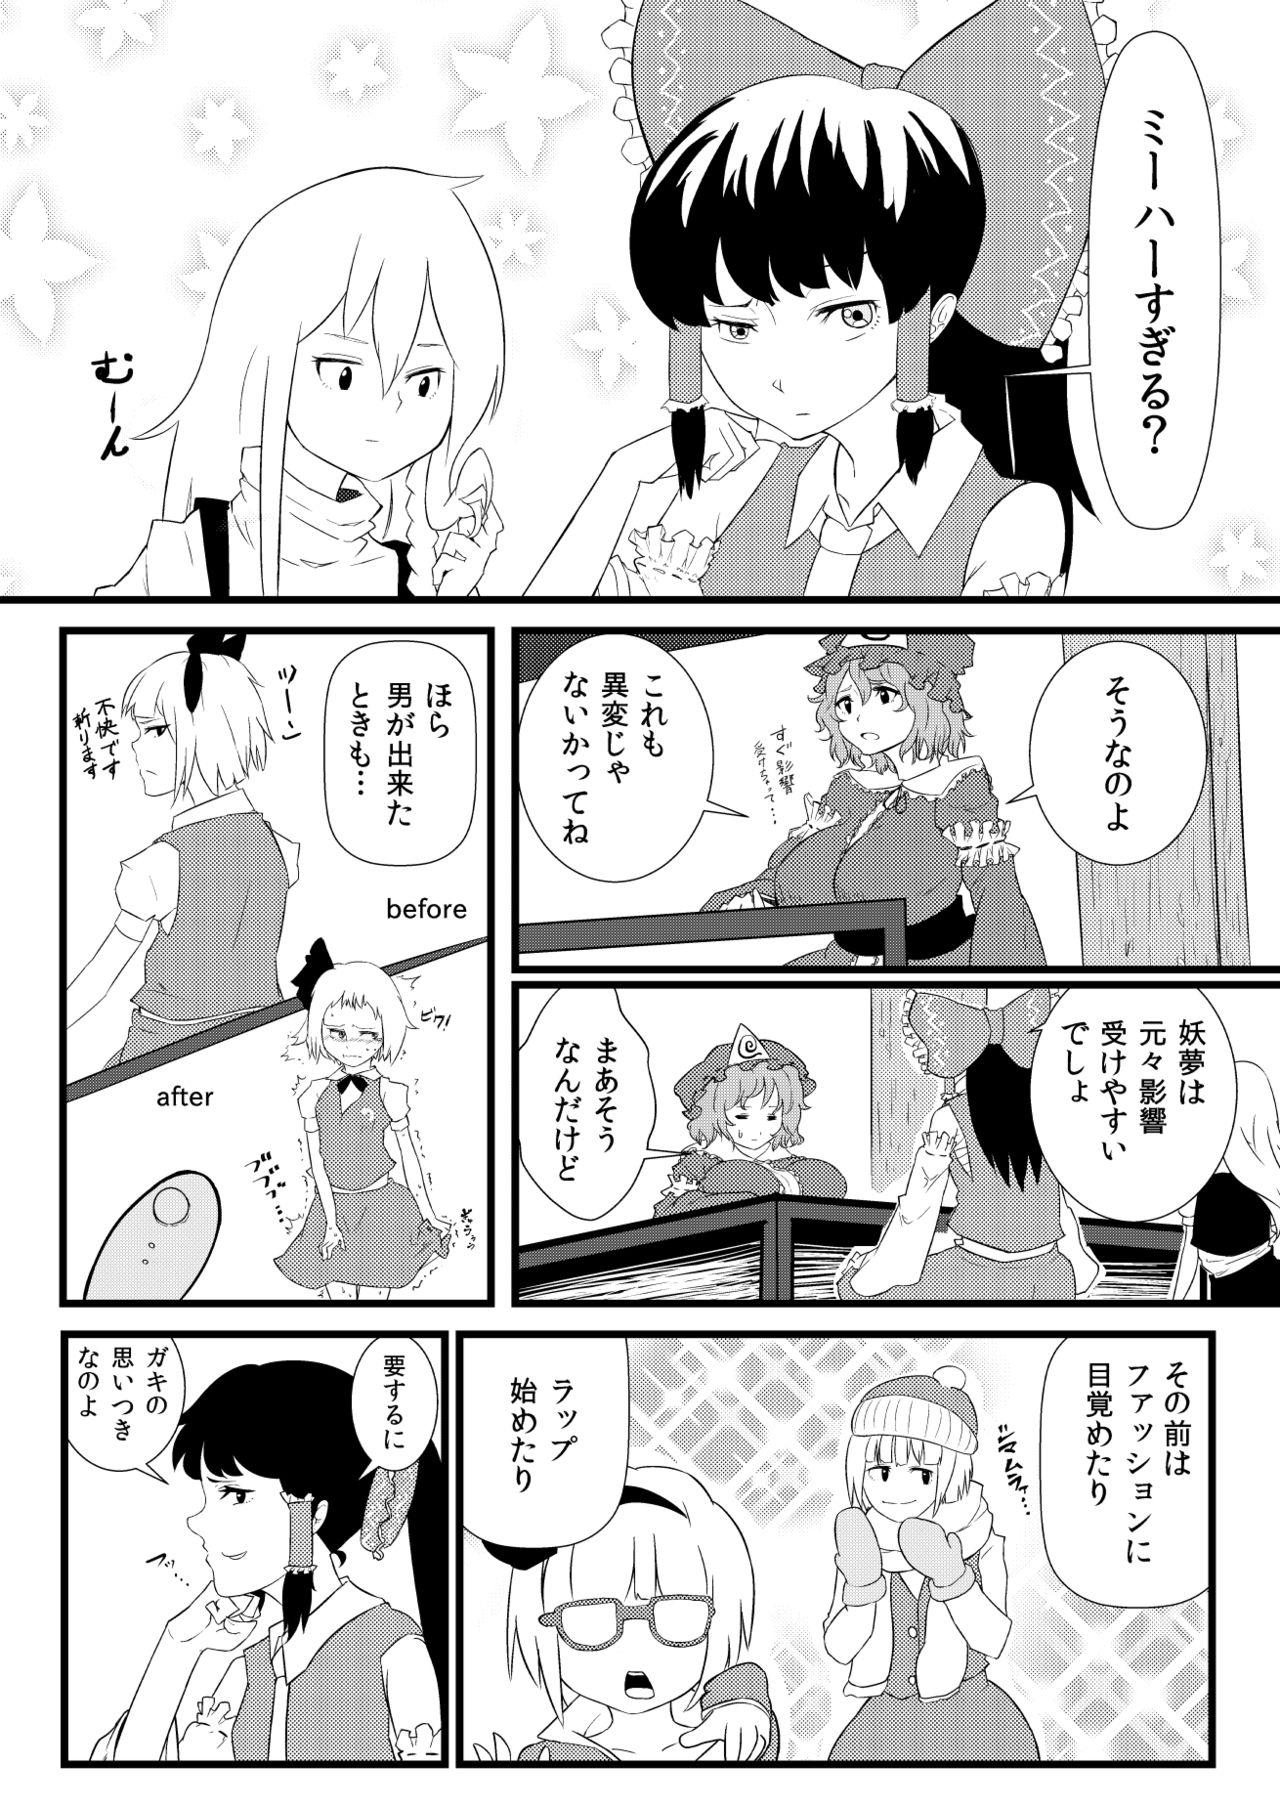 Gays 東方板としあき合同誌5 - Touhou project Short Hair - Page 2